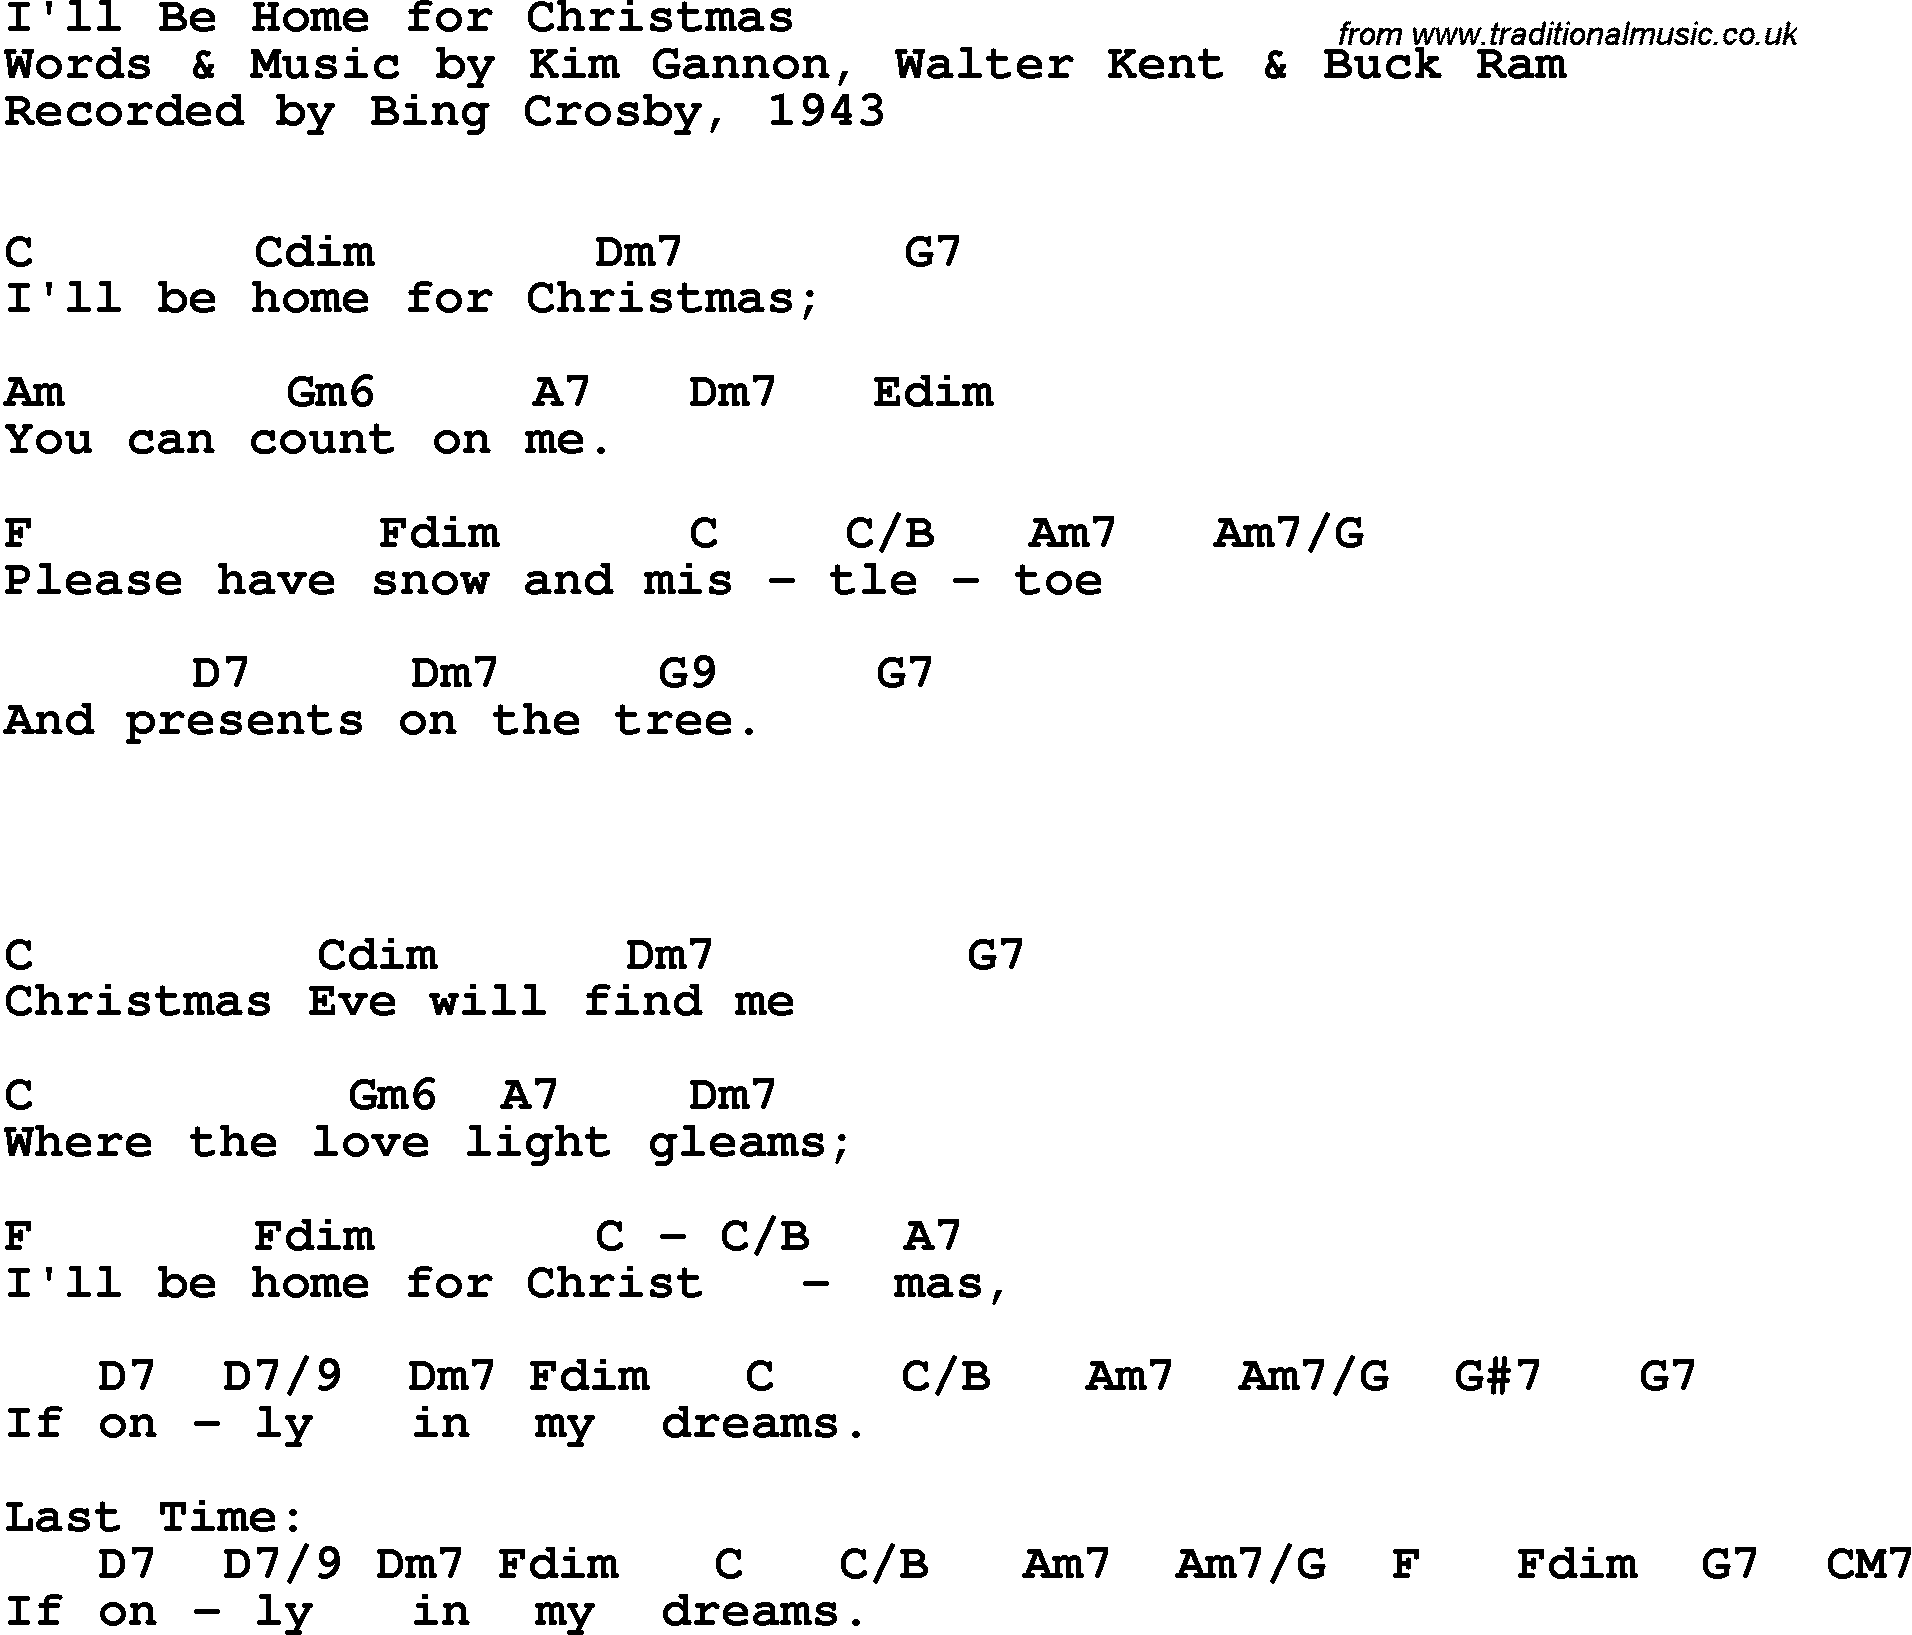 Song Lyrics with guitar chords for I'll Be Home For Christmas - Bing Crosby, 1943